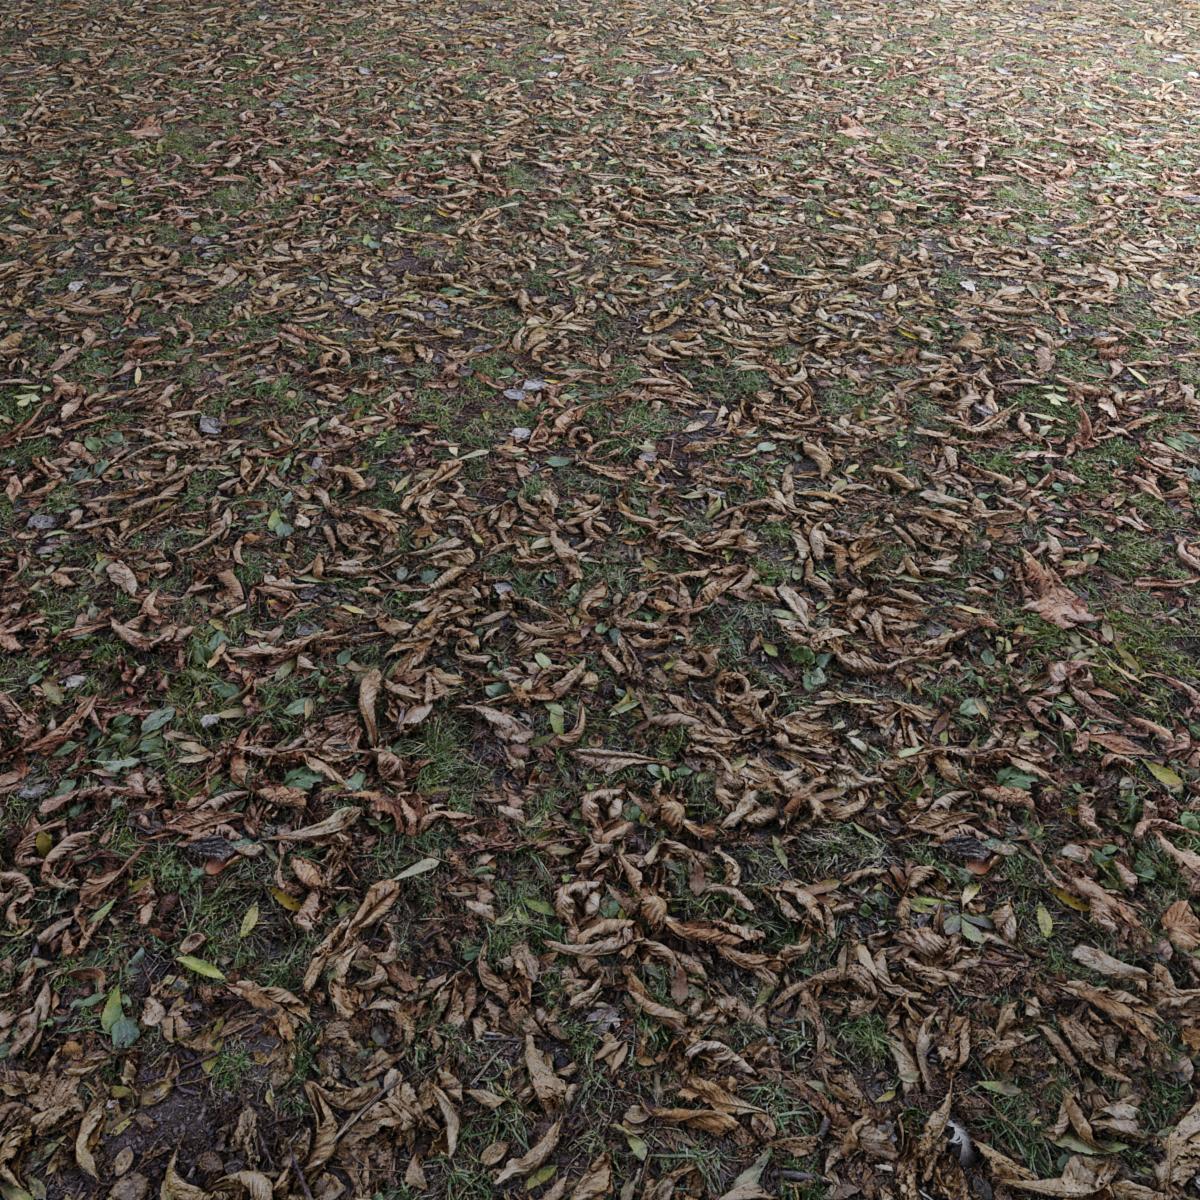 AUTUMN-LEAVES-DRY-WITH-GRASS